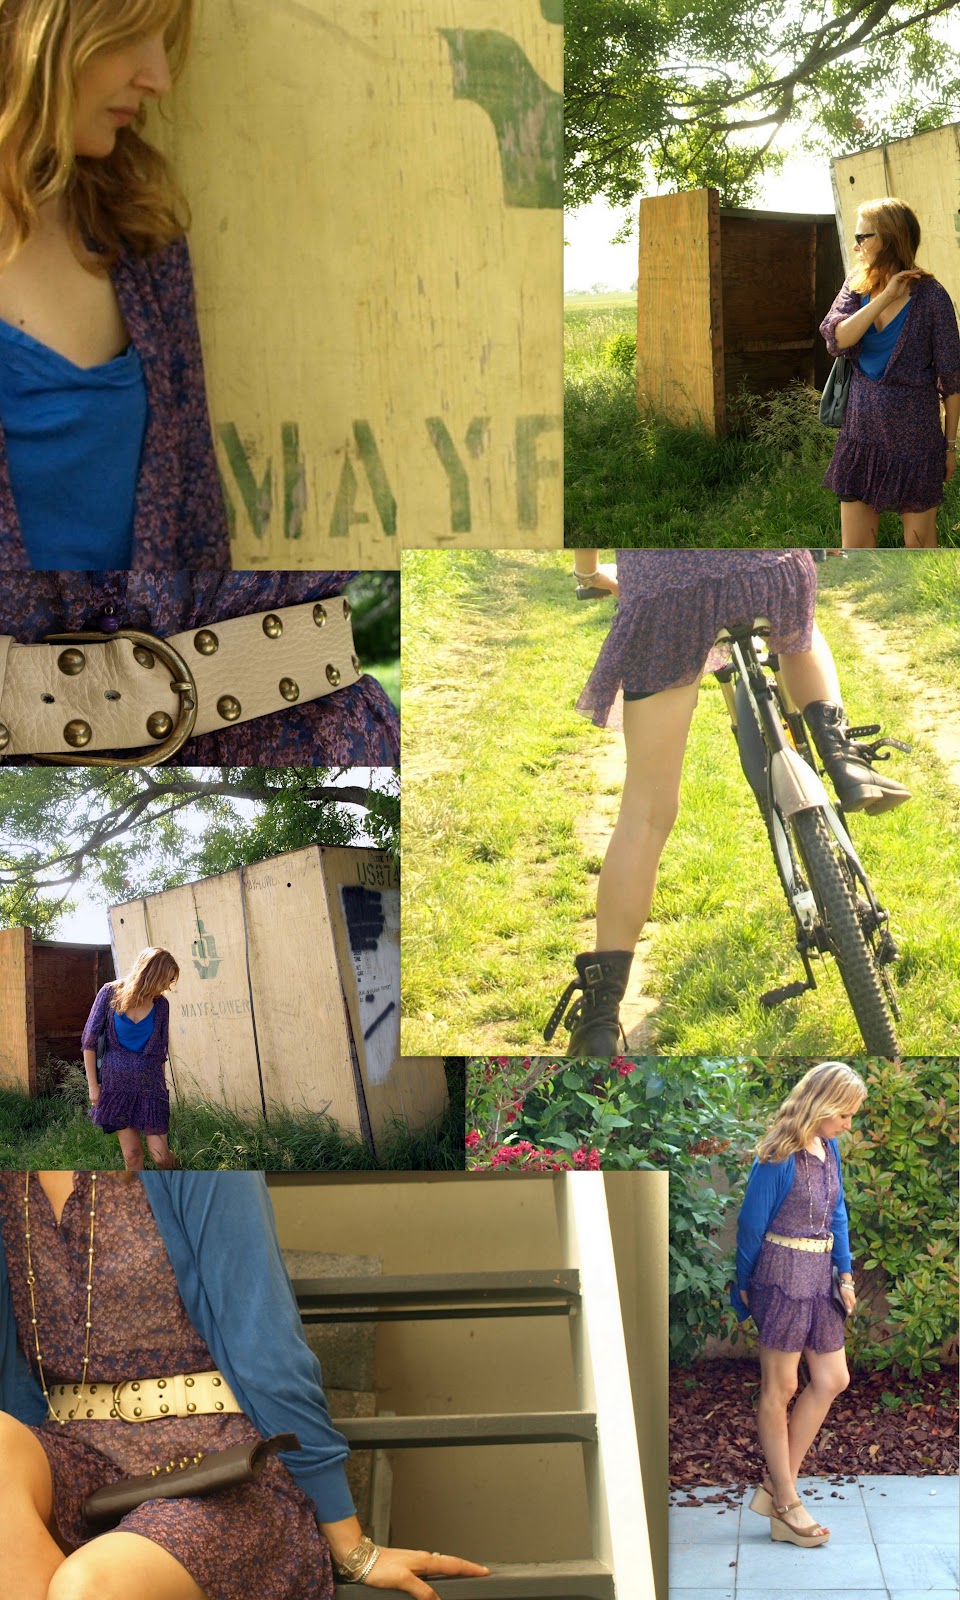 Floral dress, Floral dress and combat boots, biking in a dress